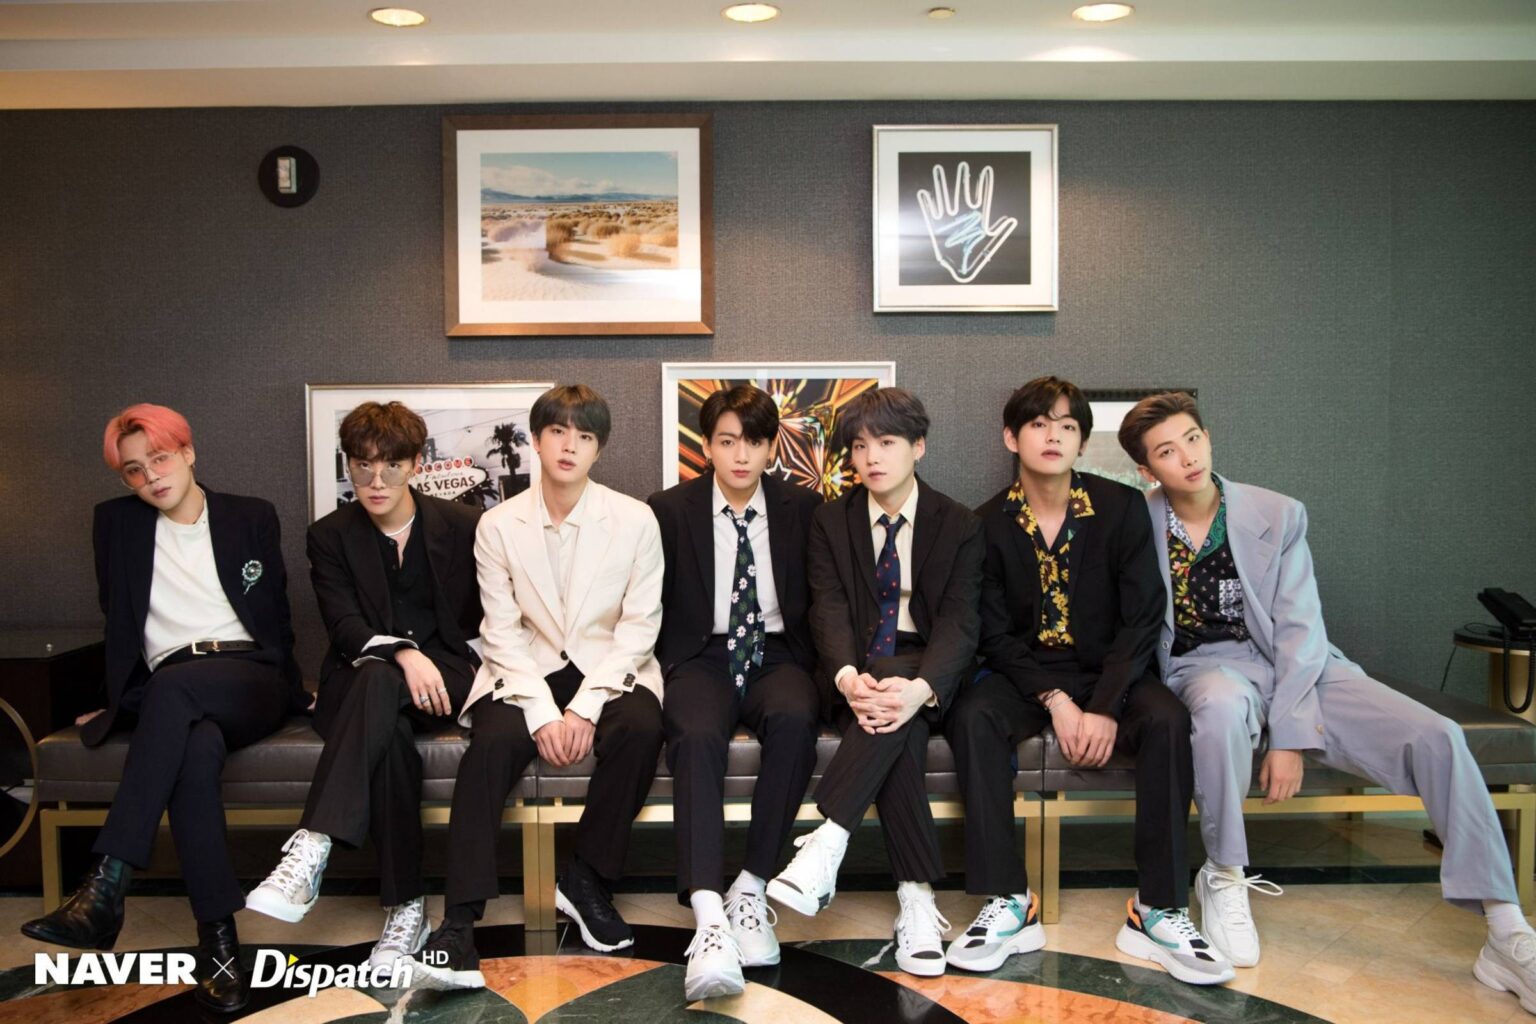 Want to know the nitty gritty details behind the inspiration for all of BTS's albums? We have all the information you need.